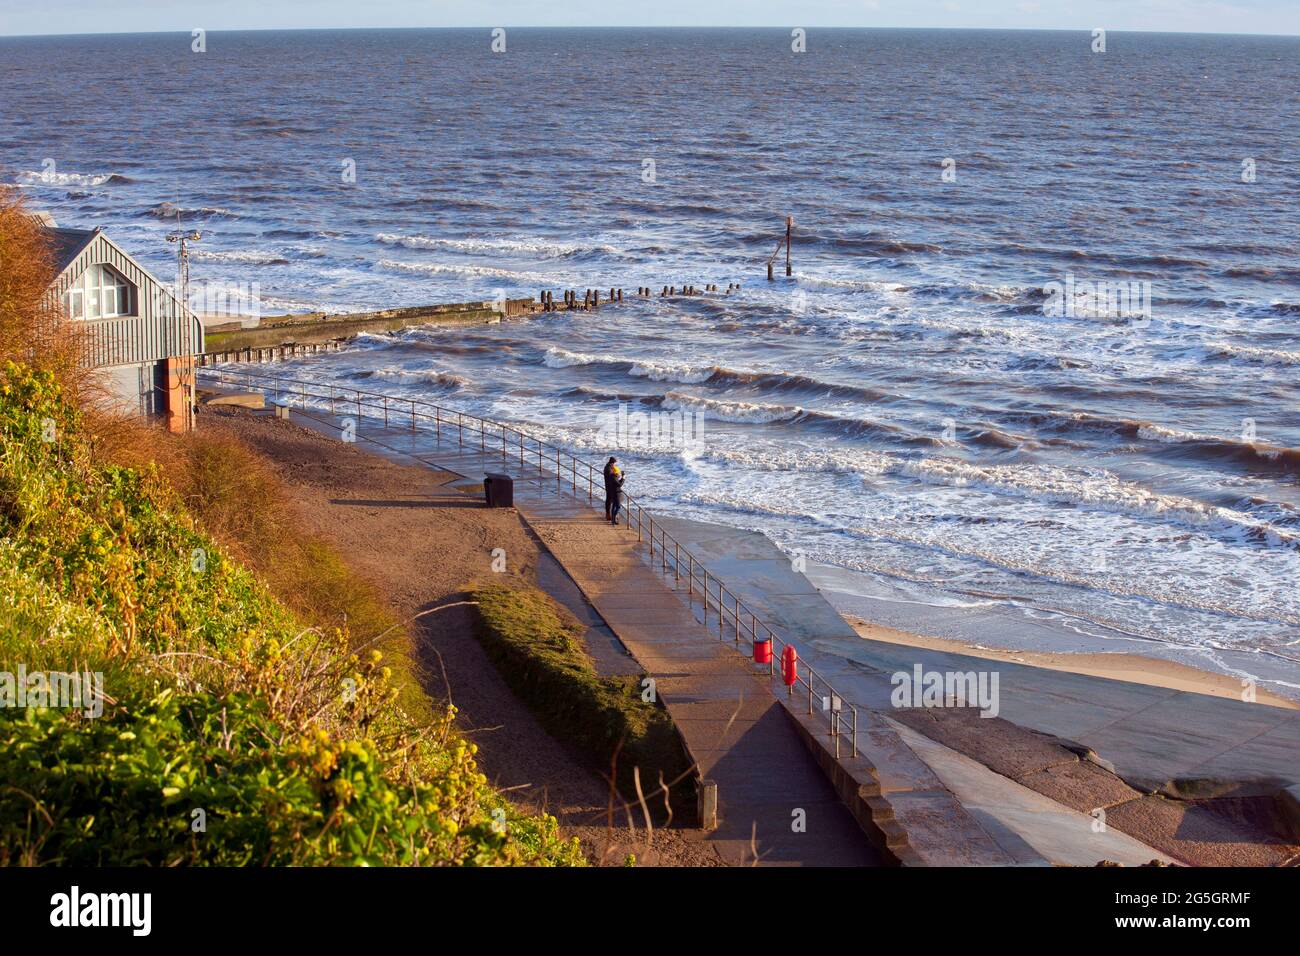 A couple look out to sea next to the lifeboat station at Mundesley on the North Norfolk coast, England. image taken April 2021 Stock Photo